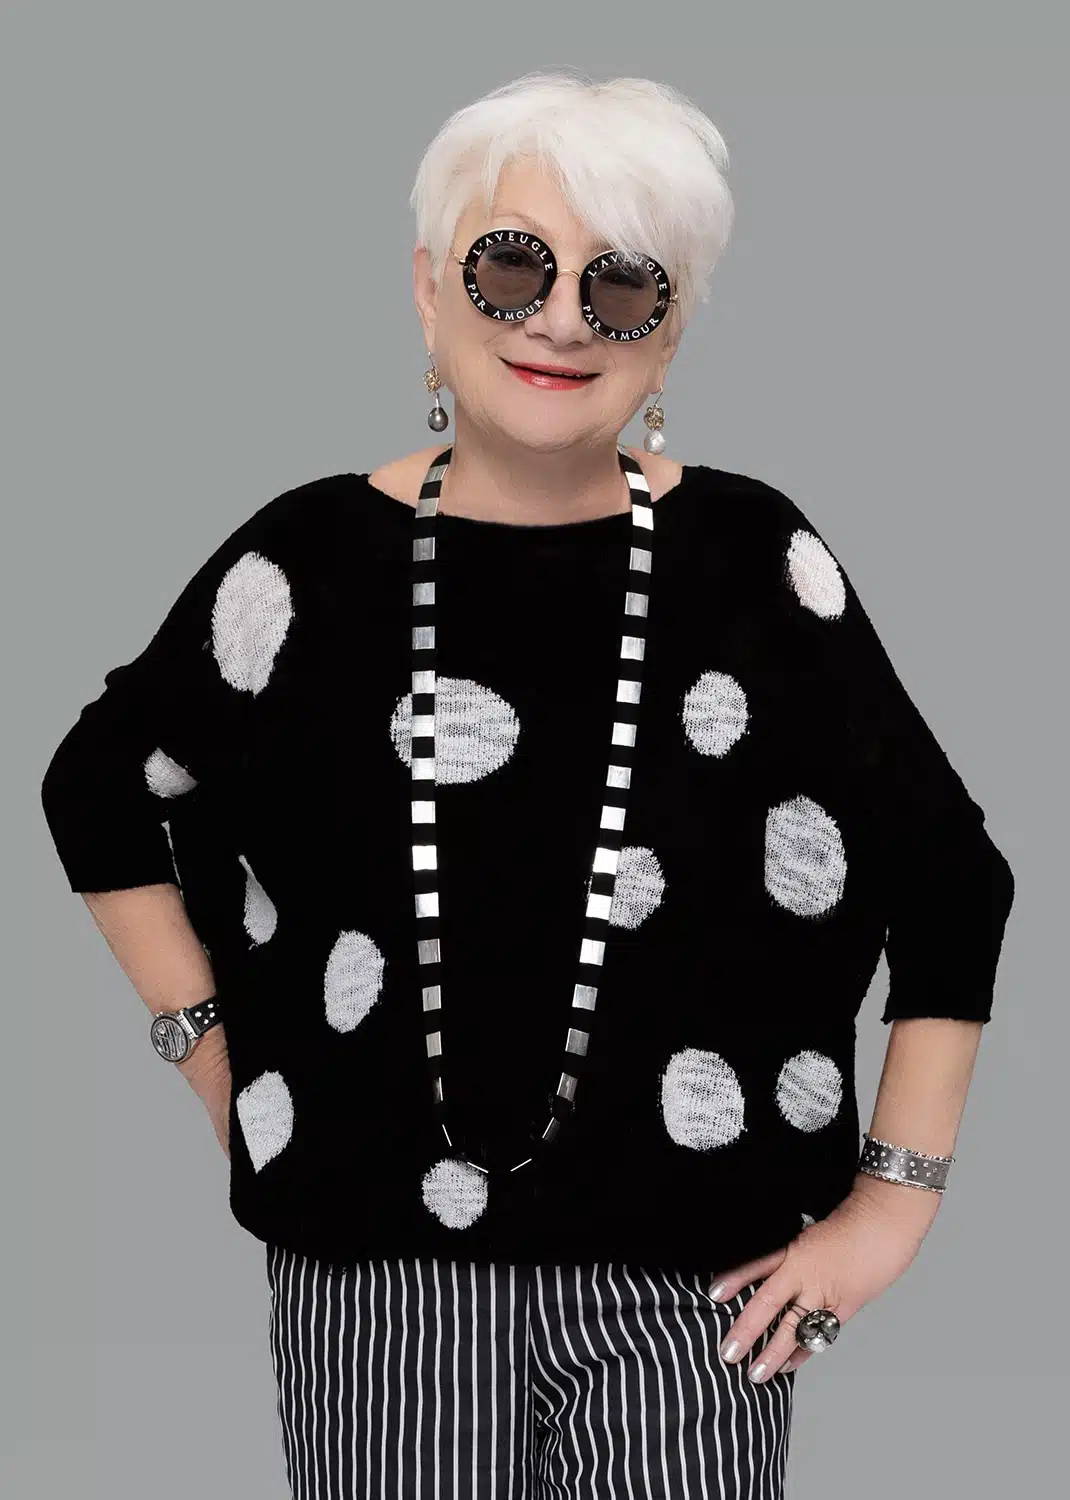 Ellen Wille wearing cool sunglasses and a polka dot sweater